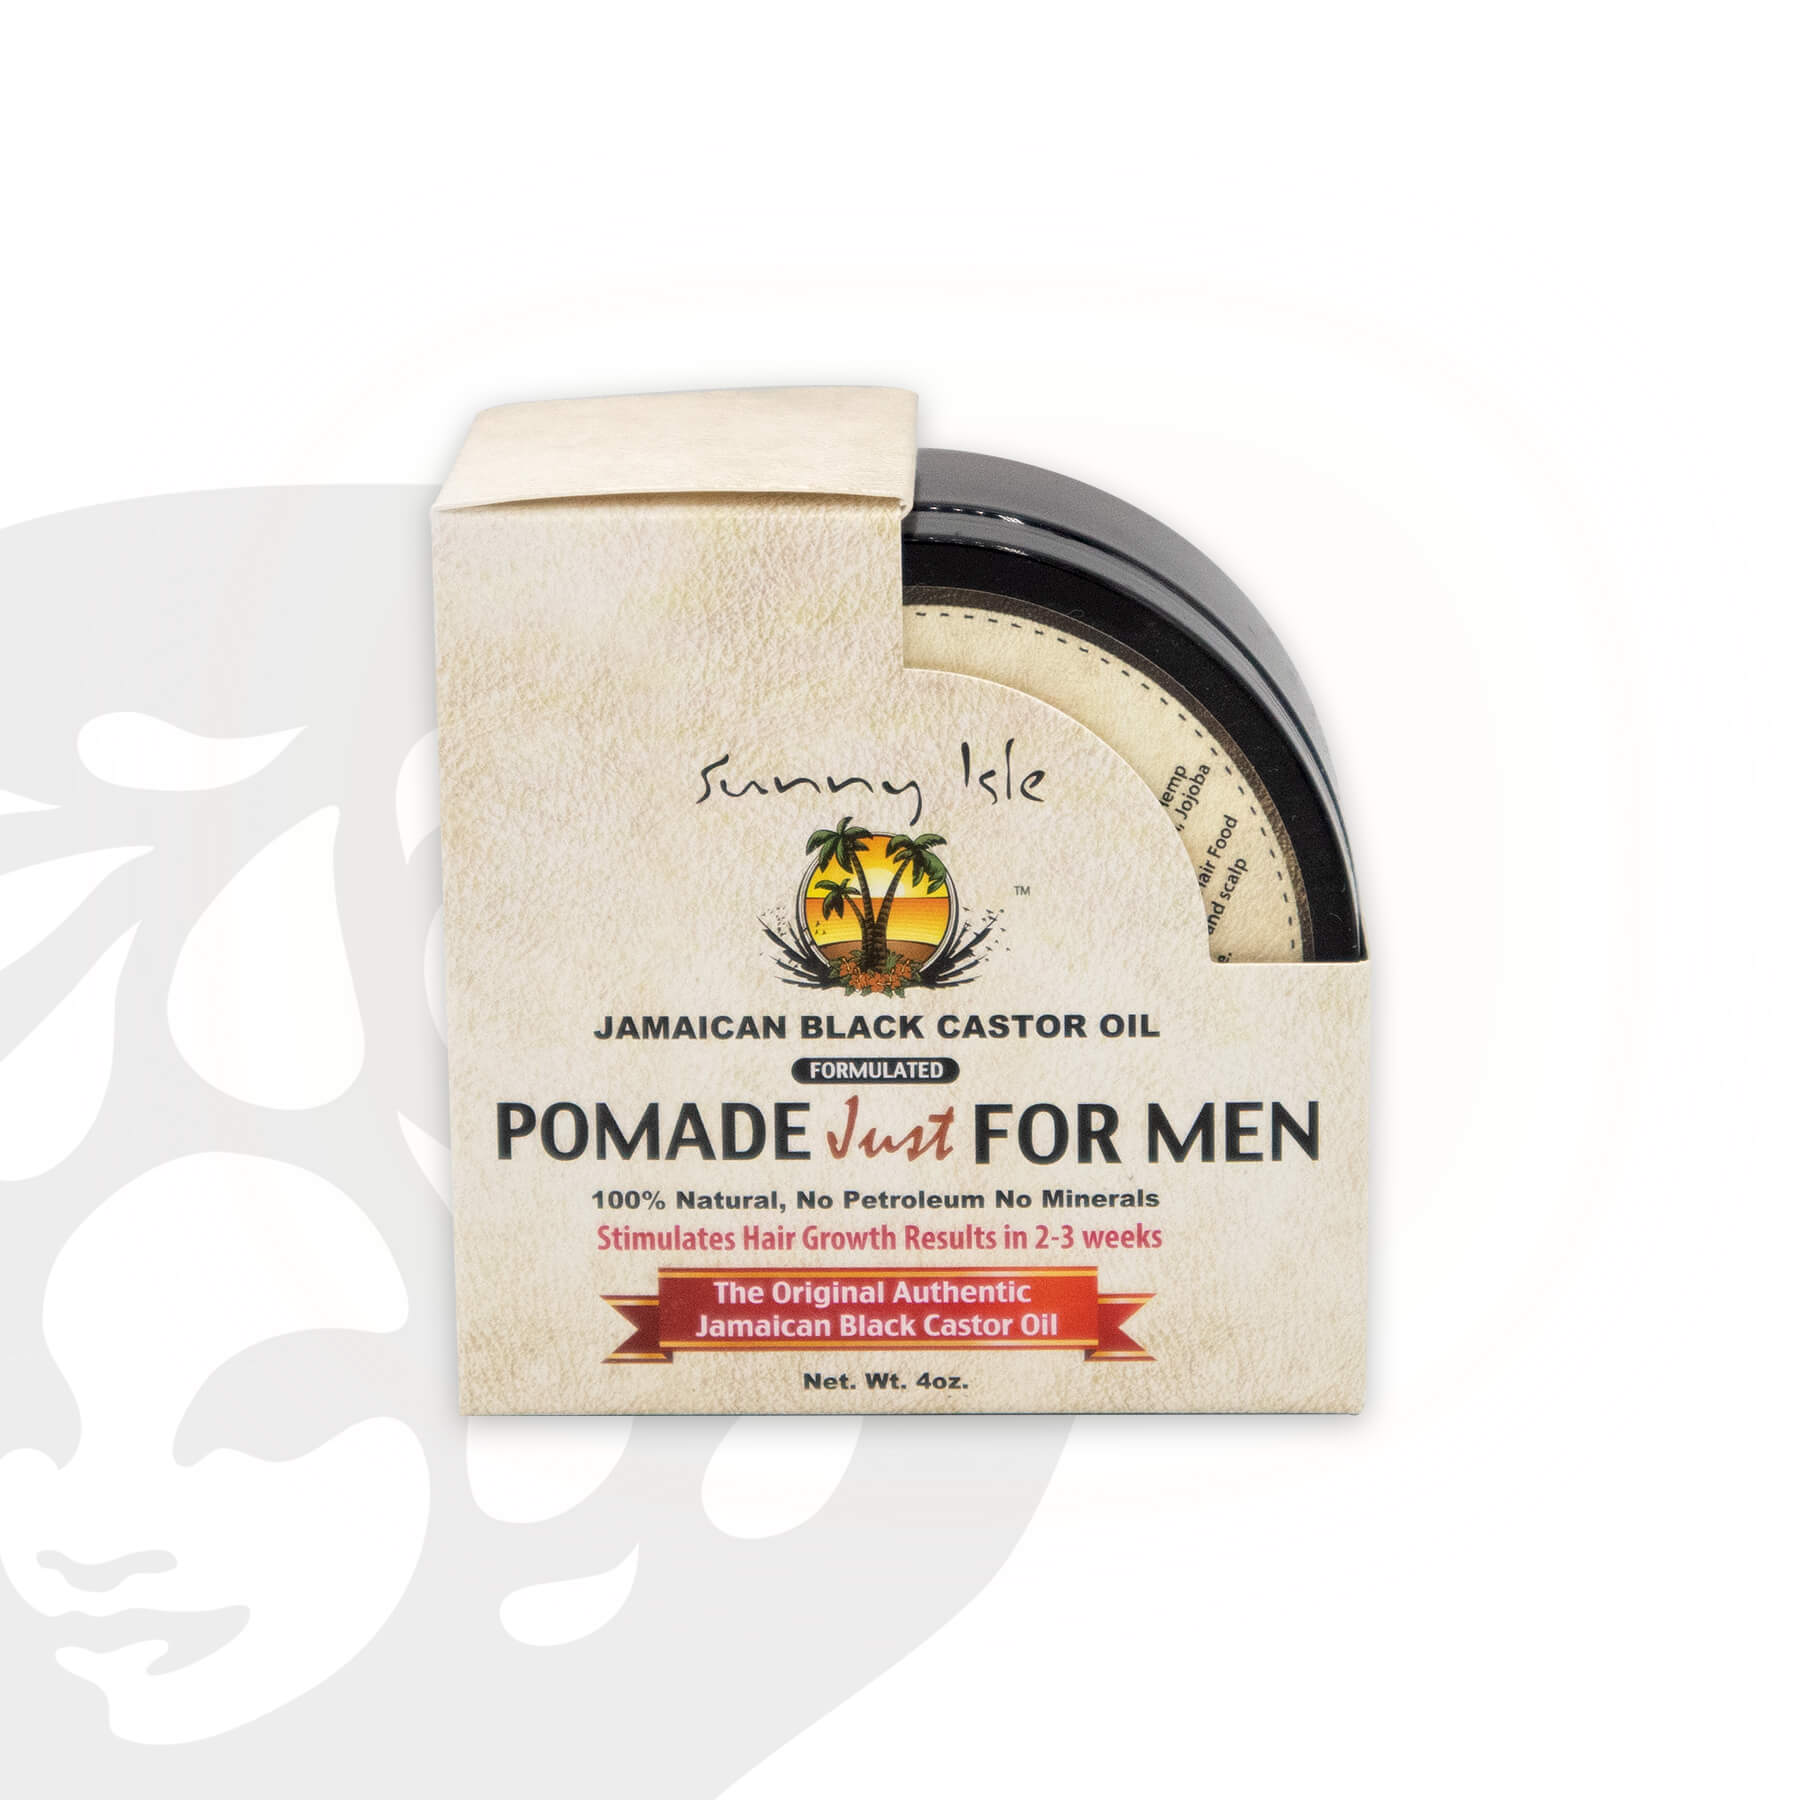 Sunny Isle Just for Men Pomade